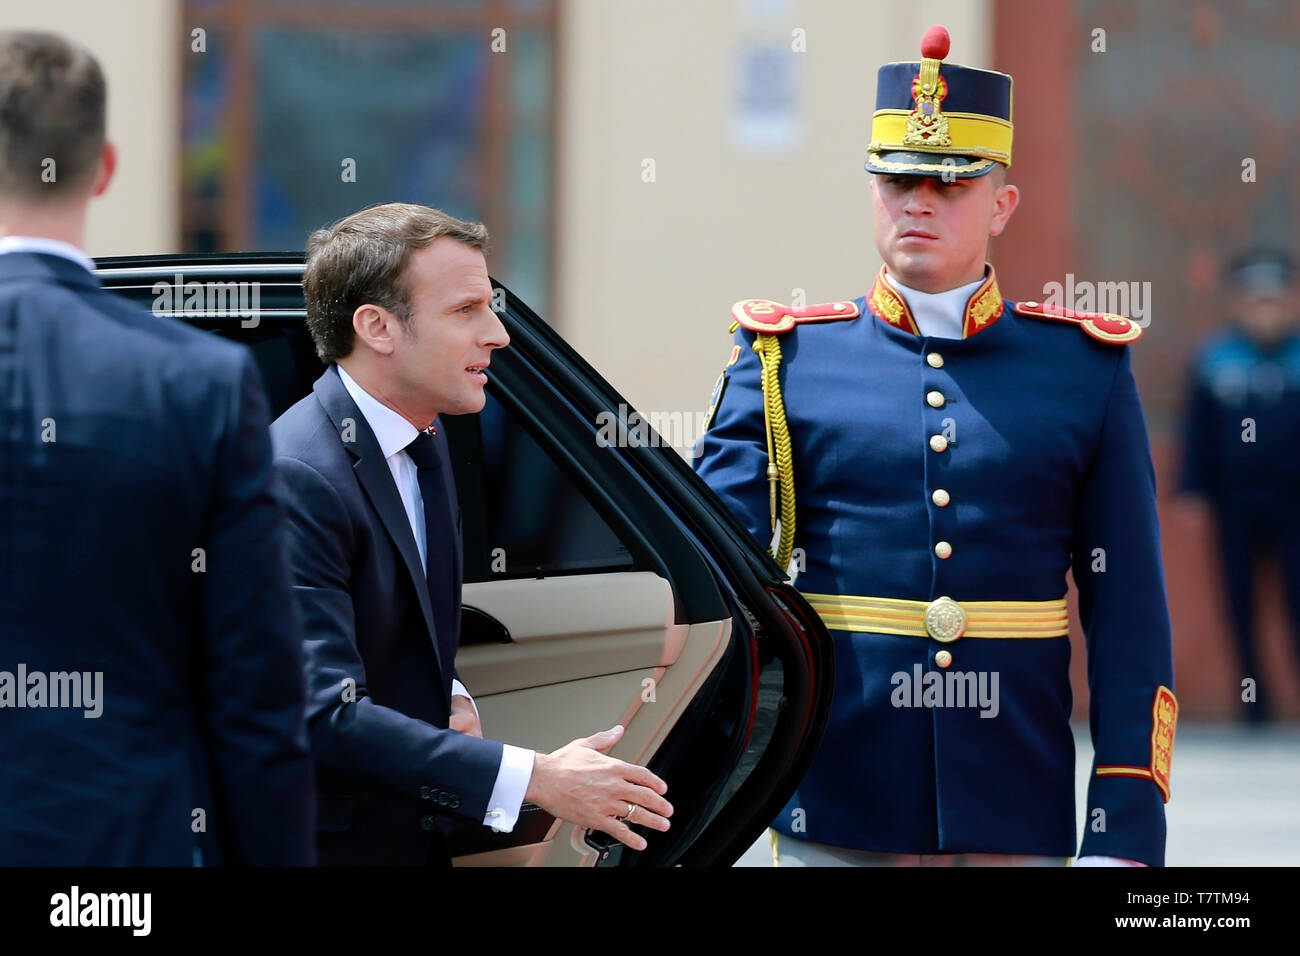 Sibiu, Romania. 9th May, 2019. French President Emmanuel Macron arrives for an European Union (EU) informal summit in Sibiu, Romania, on May 9, 2019. The leaders of the EU member states on Thursday agreed on defending 'one Europe' and upholding the rules-based international order in their '10 commitments' declaration, made at an informal summit in Sibiu, central Romania. Credit: Cristian Cristel/Xinhua/Alamy Live News Stock Photo